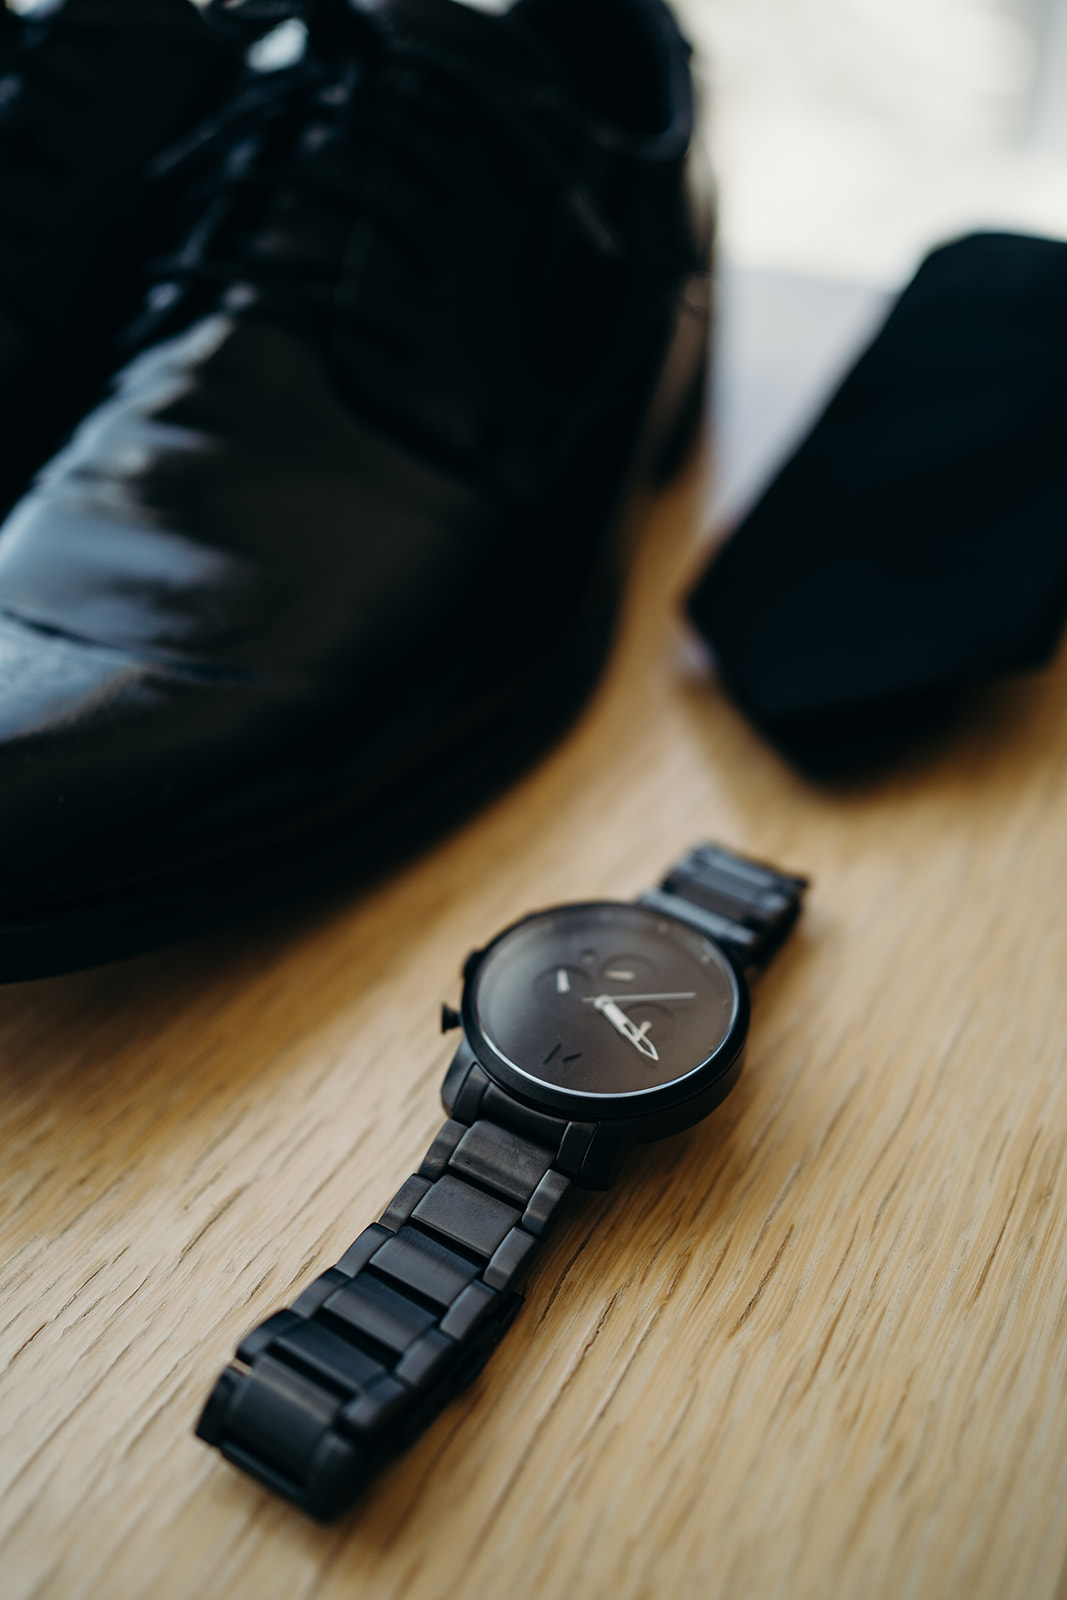 Close-up shot of shoes, watch and tie on a beige square table.